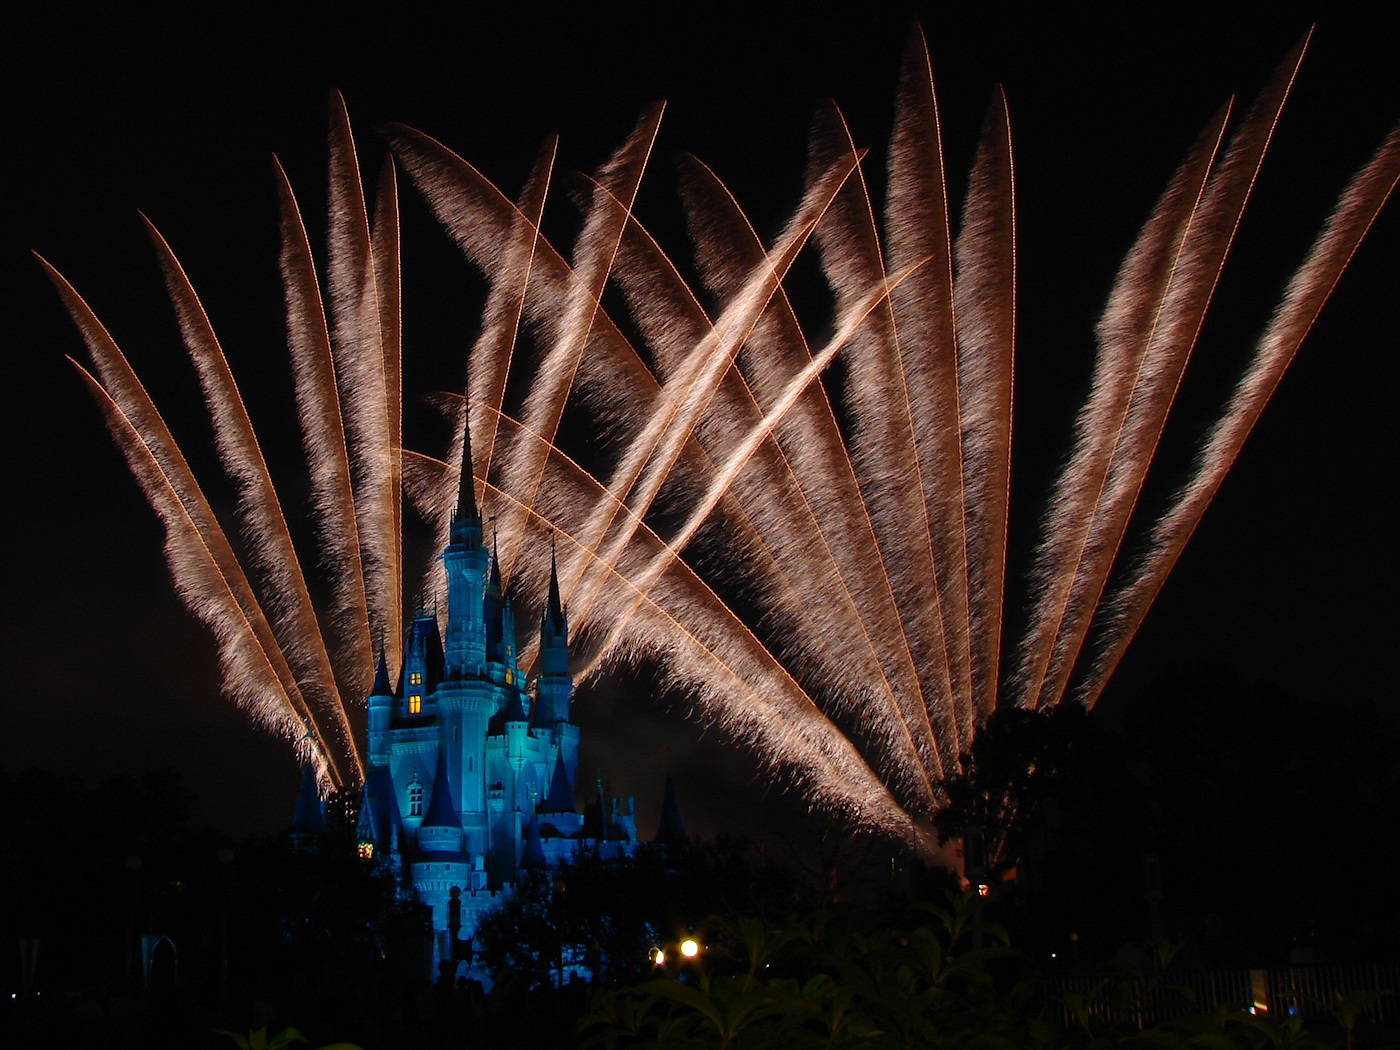 Fireworks of Wishes behind castle